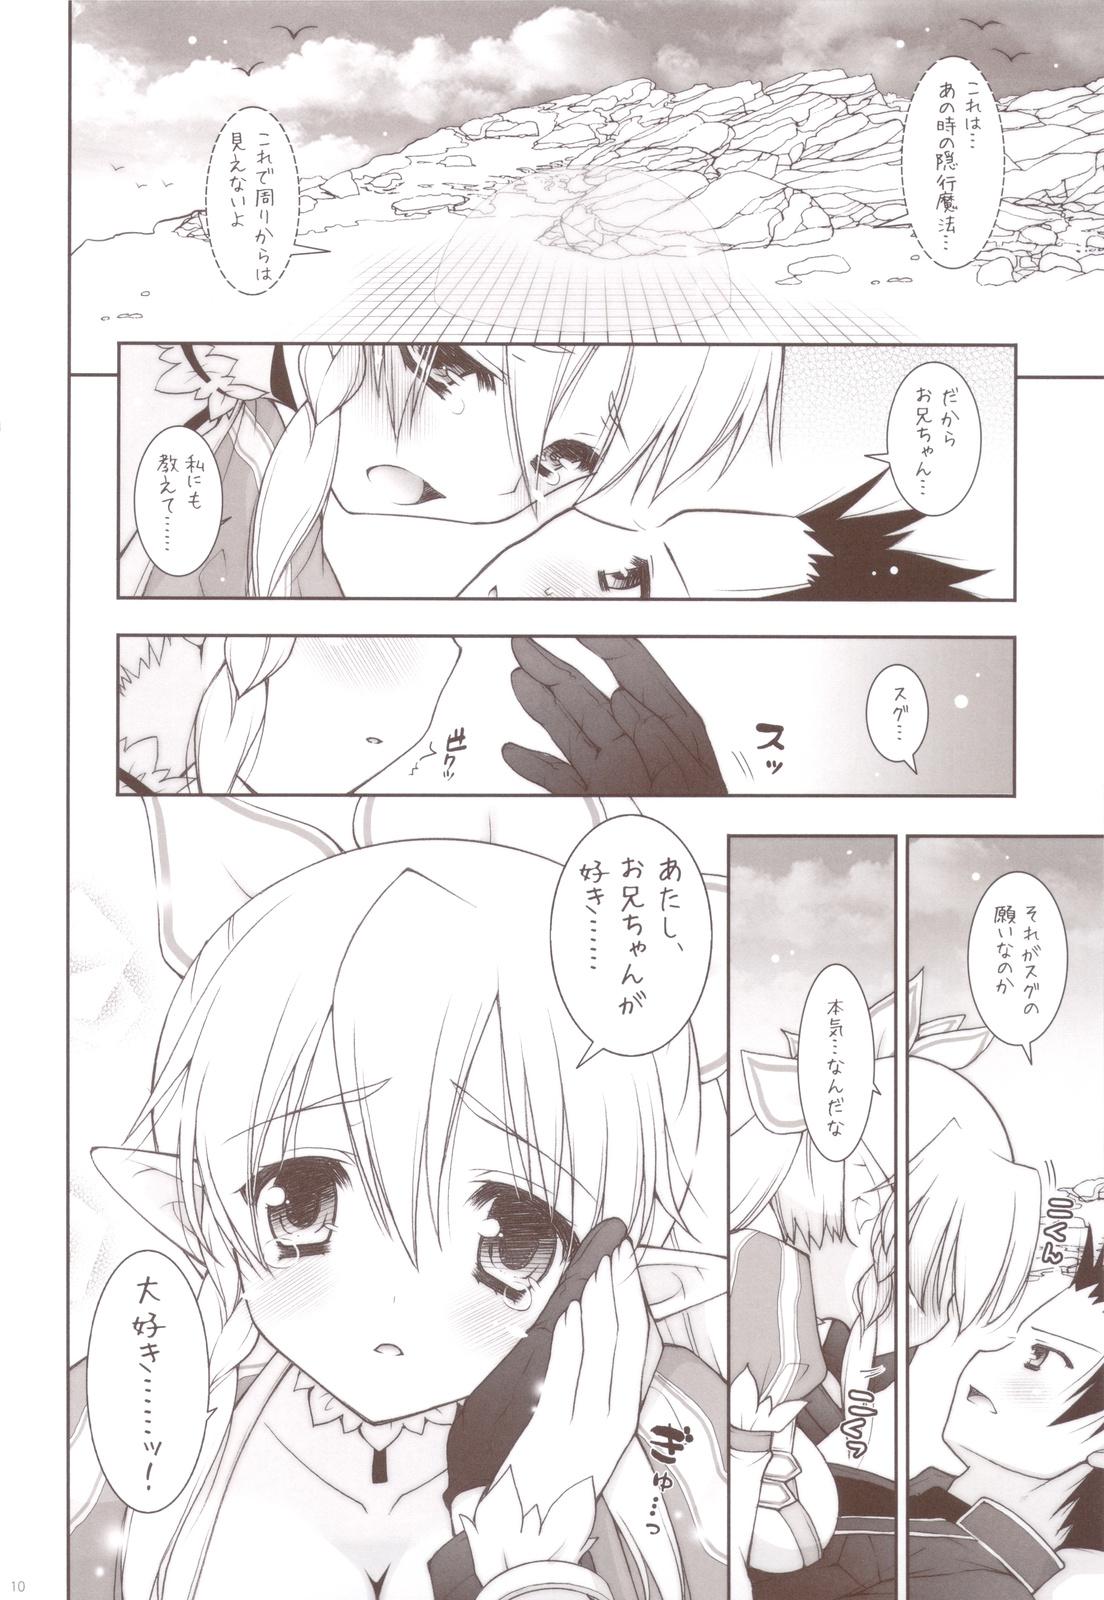 Squirting Sex And Oppai + Omake Bon - Sword art online Vaginal - Page 9